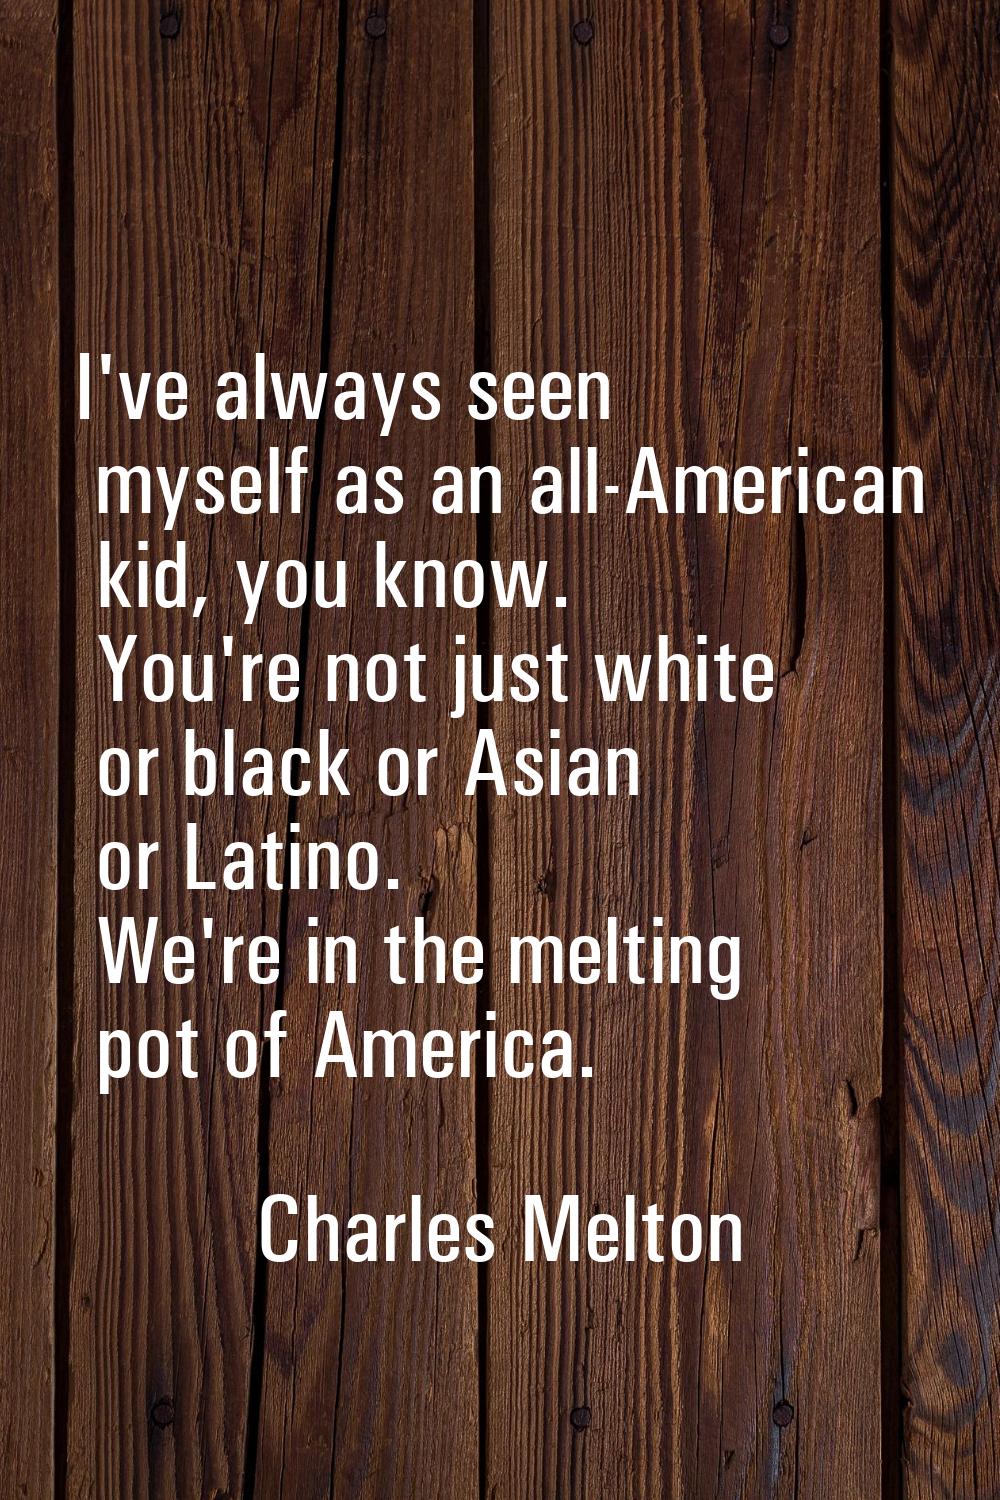 I've always seen myself as an all-American kid, you know. You're not just white or black or Asian o